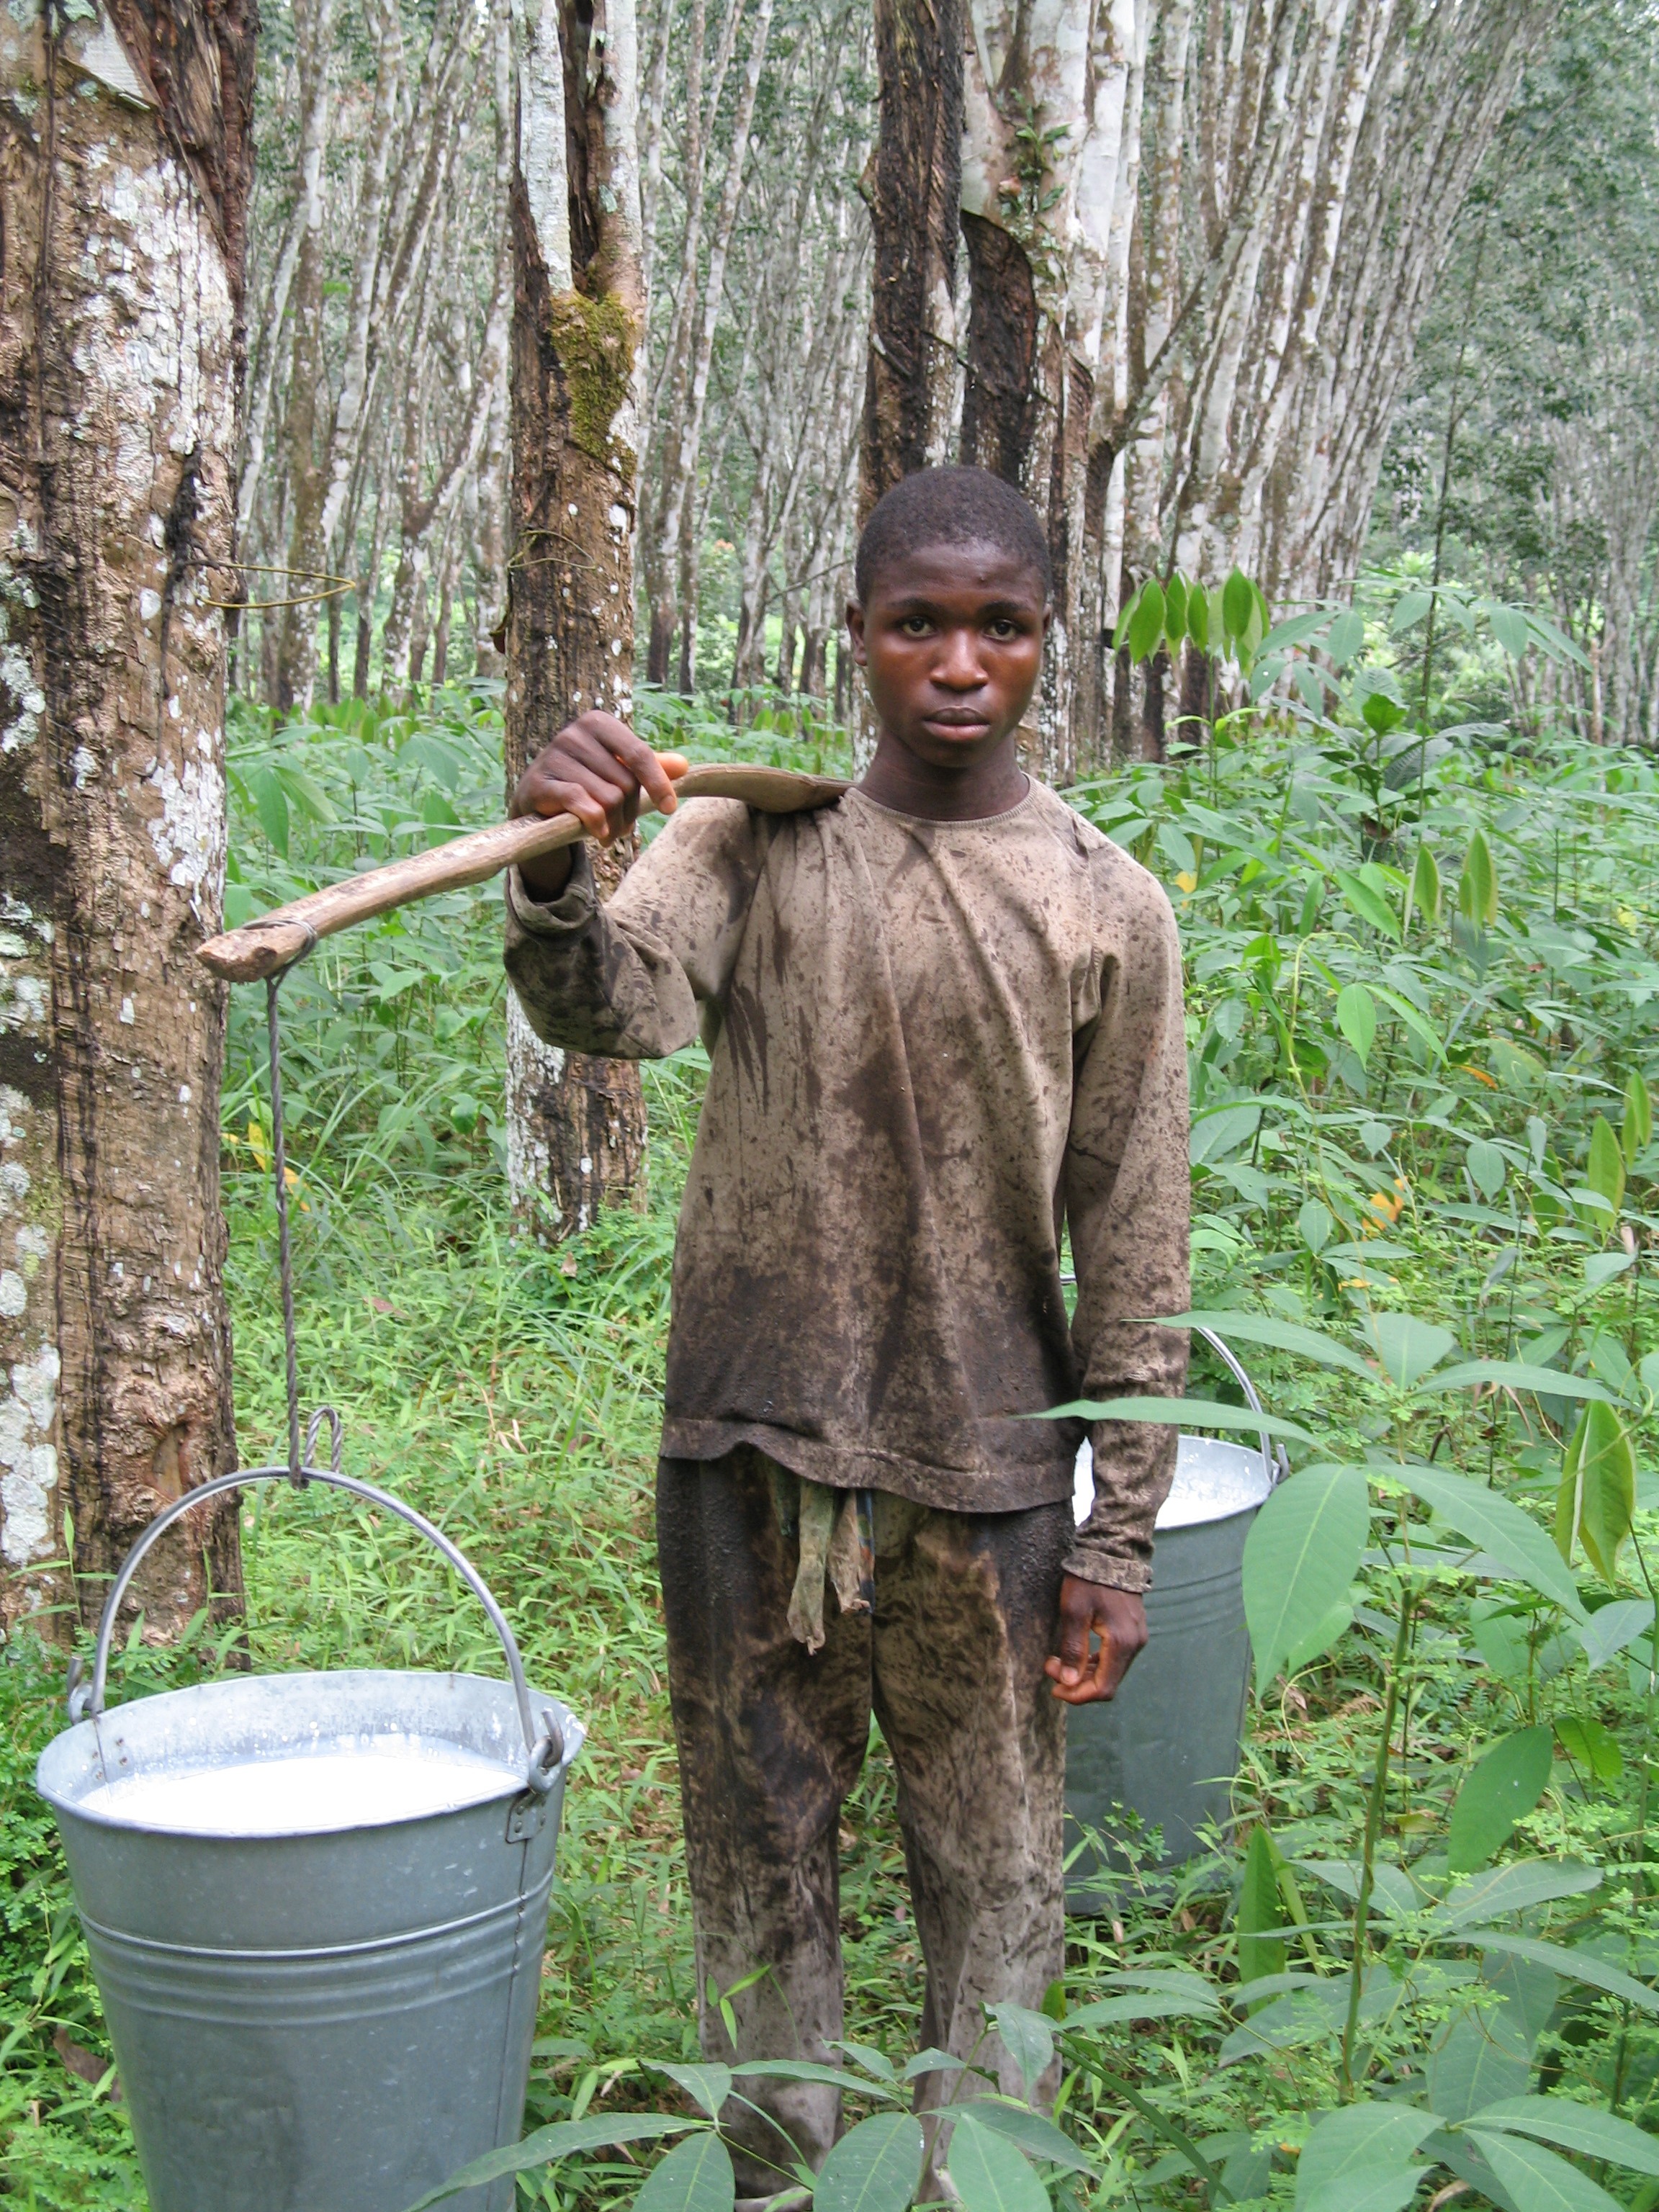 Liberia At the Crossroads: Extractive Industries, Land Grabs & Corporate Accountability